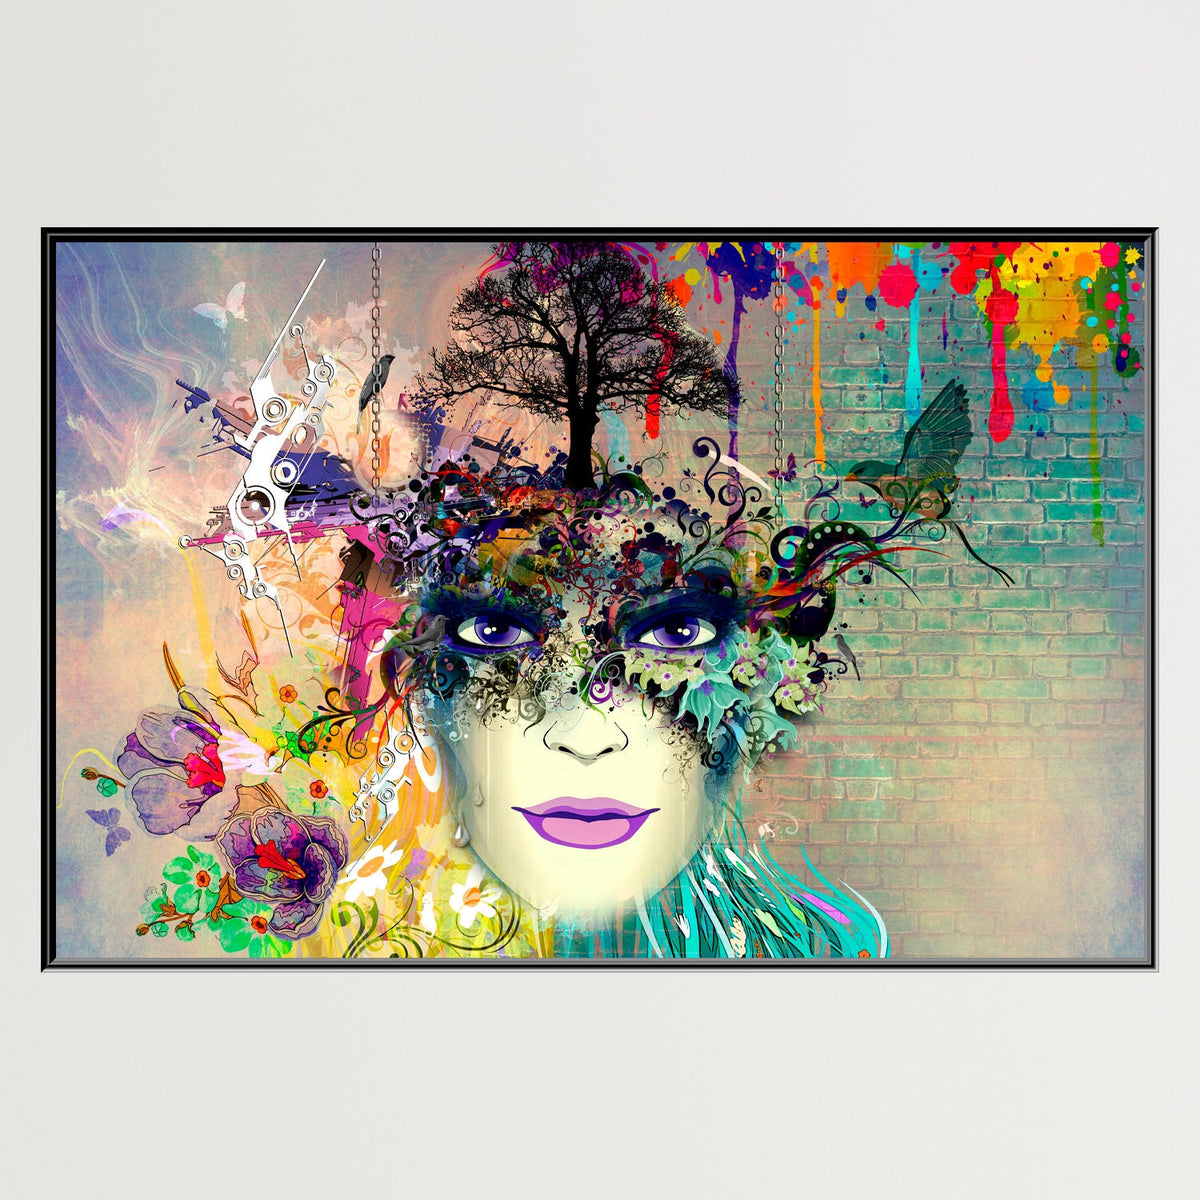 https://cdn.shopify.com/s/files/1/0387/9986/8044/products/AbstractPortraitofaWomanFloatingFrame-Plain.jpg